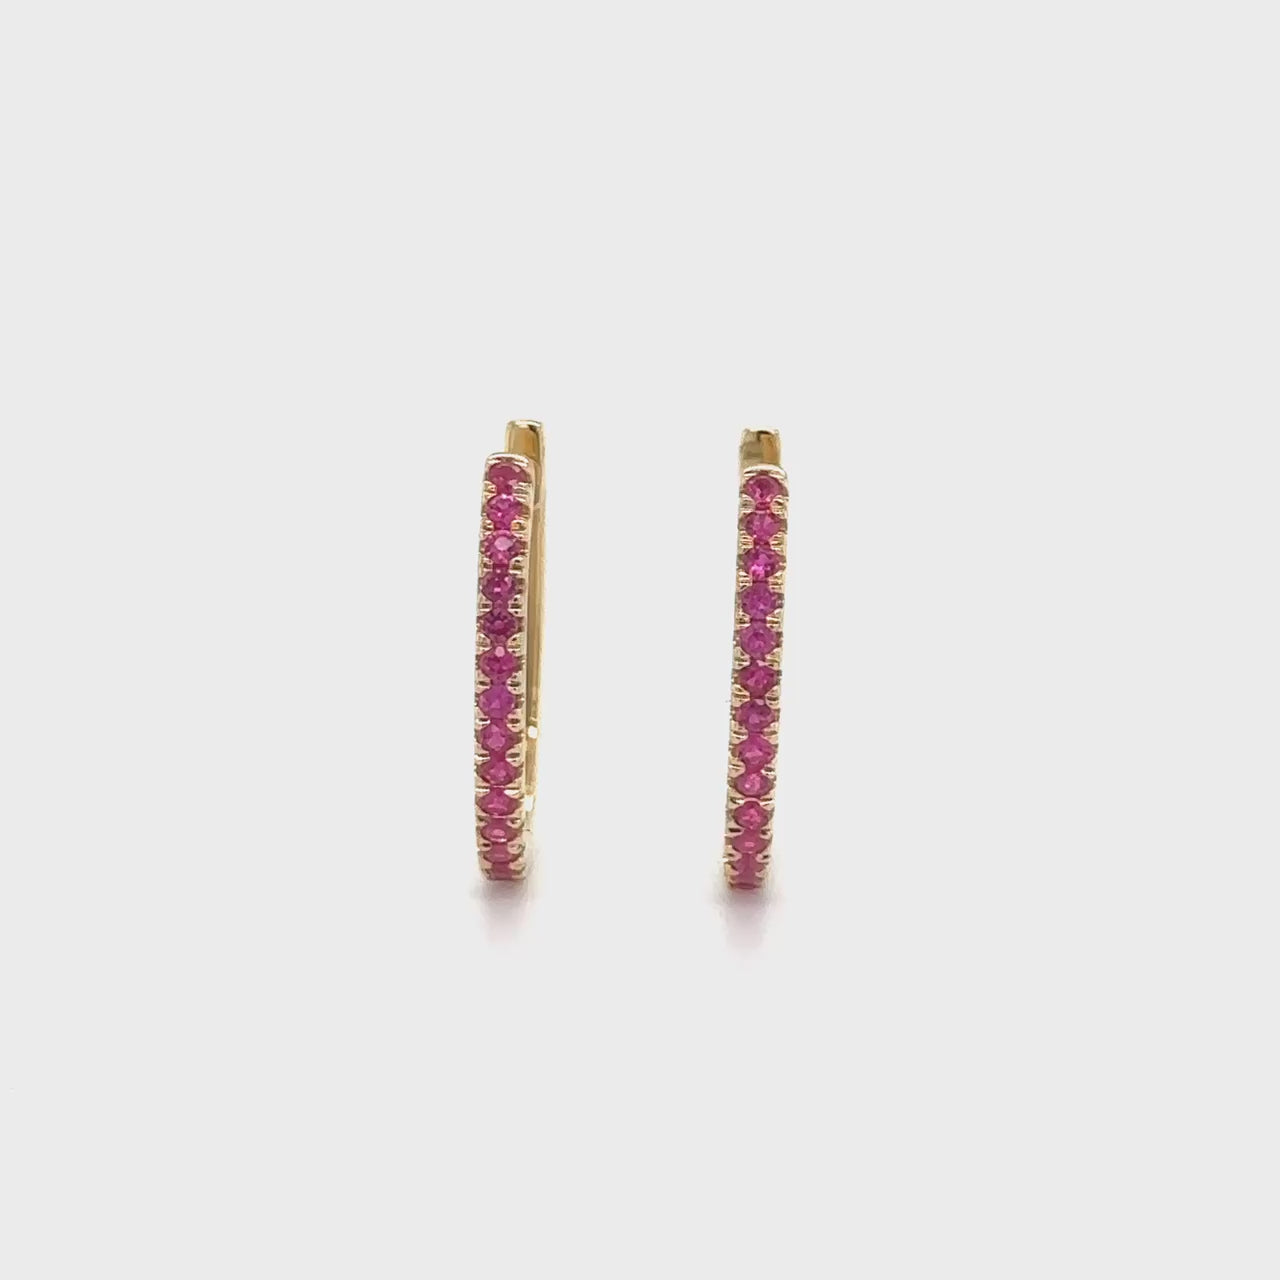 Round, Ruby, Huggy, Earrings, Jewelry, Accessories, Fashion, Red, Gemstone, Studs, Elegant, Women's, Style, Gift"